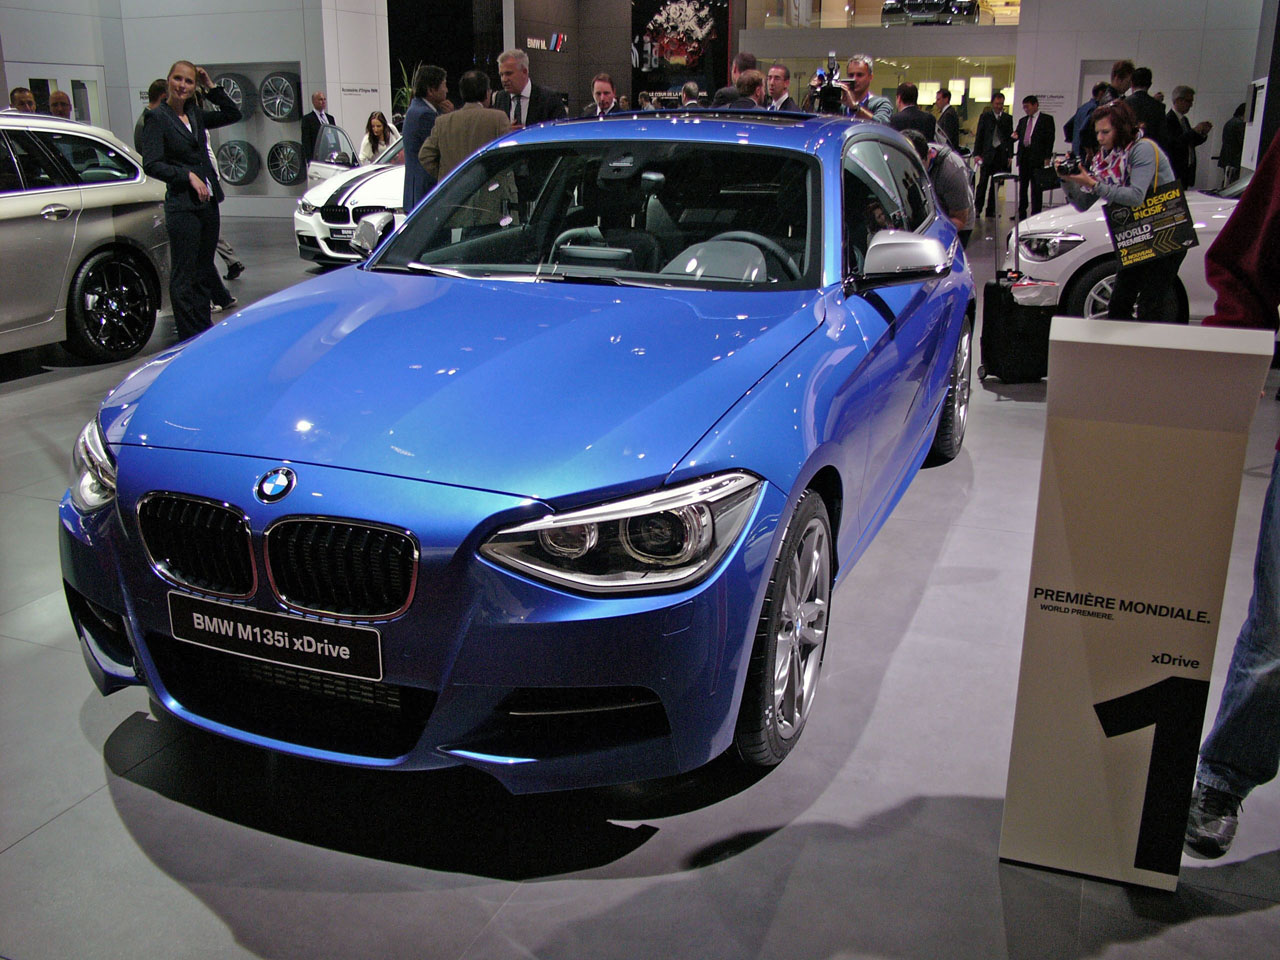 F20 BMW 1 Series comes to Paris with xDrive